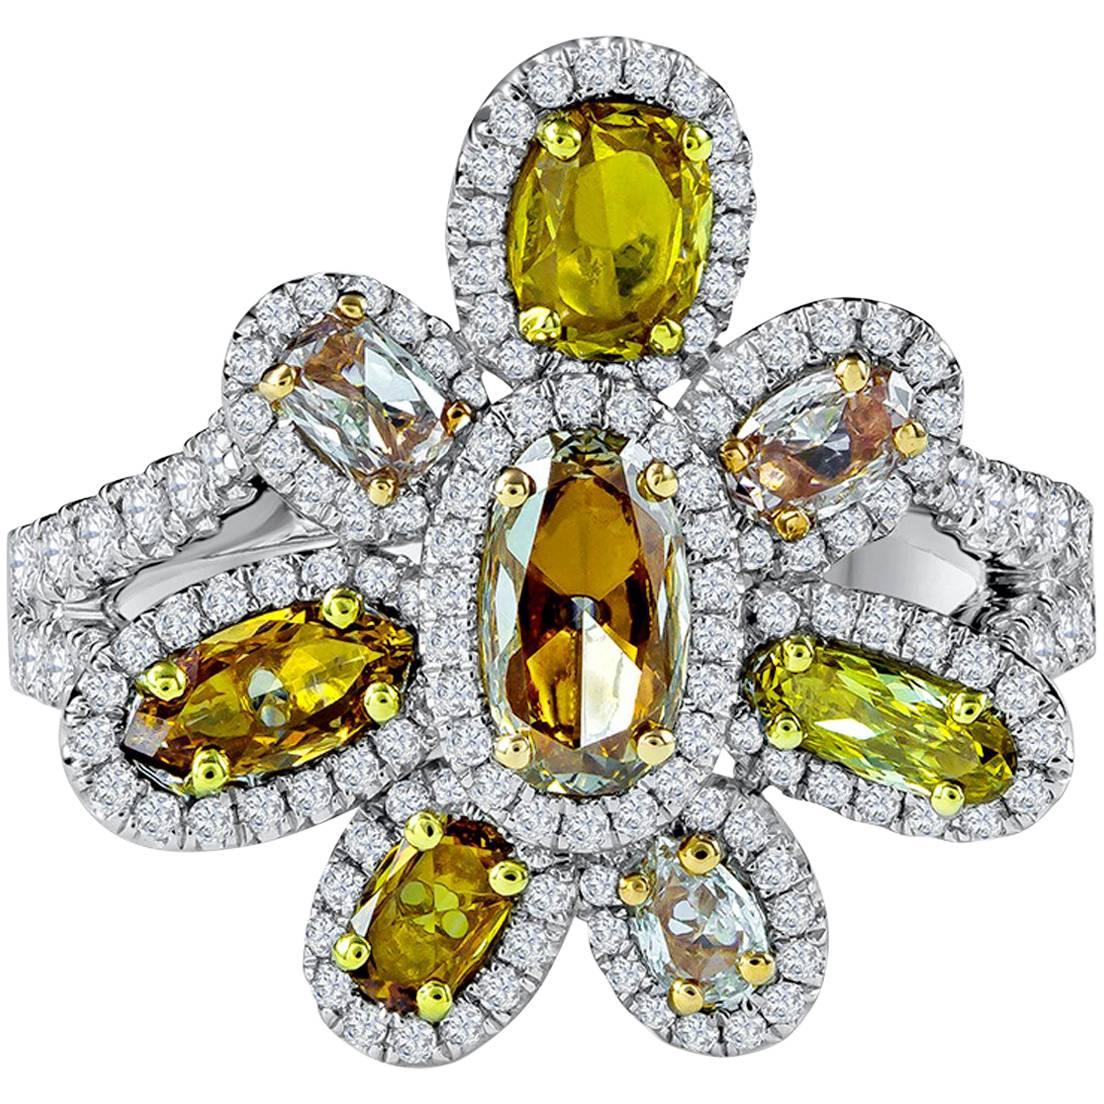 1.36 Carat Total Mixed Cut Fancy Color Gemstone with Diamond Flower Ring